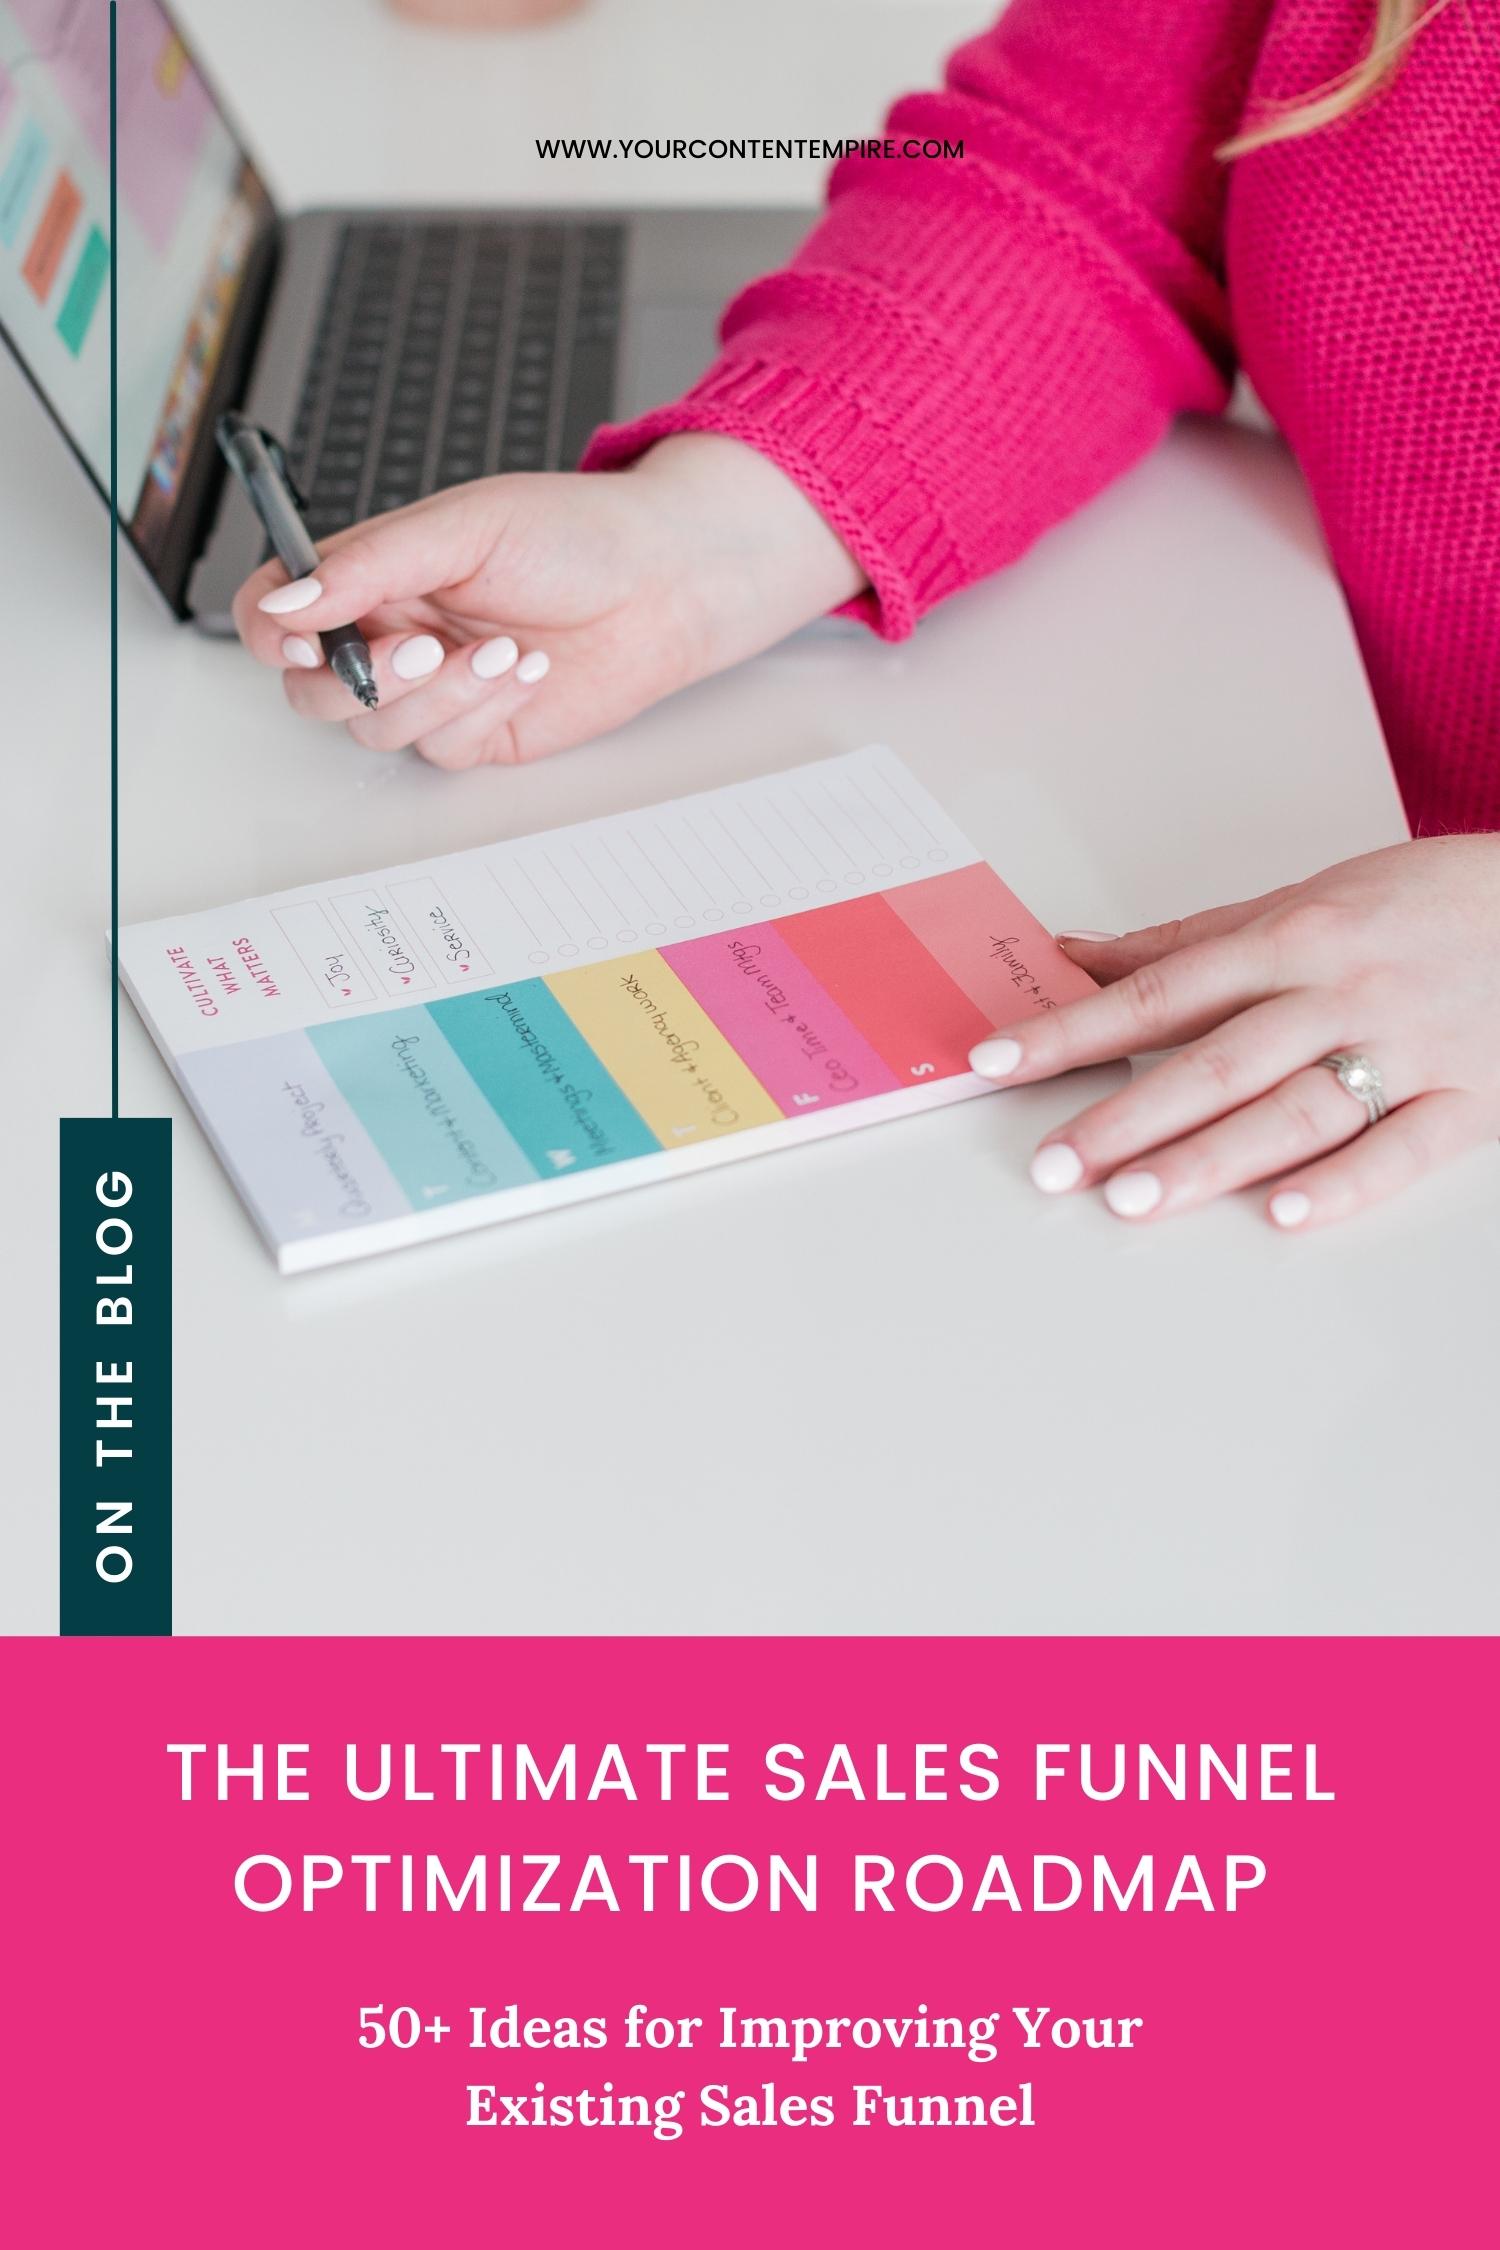 50+ Funnel Optimization Ideas to Tweak Your Way to More Sales by Your Content Empire